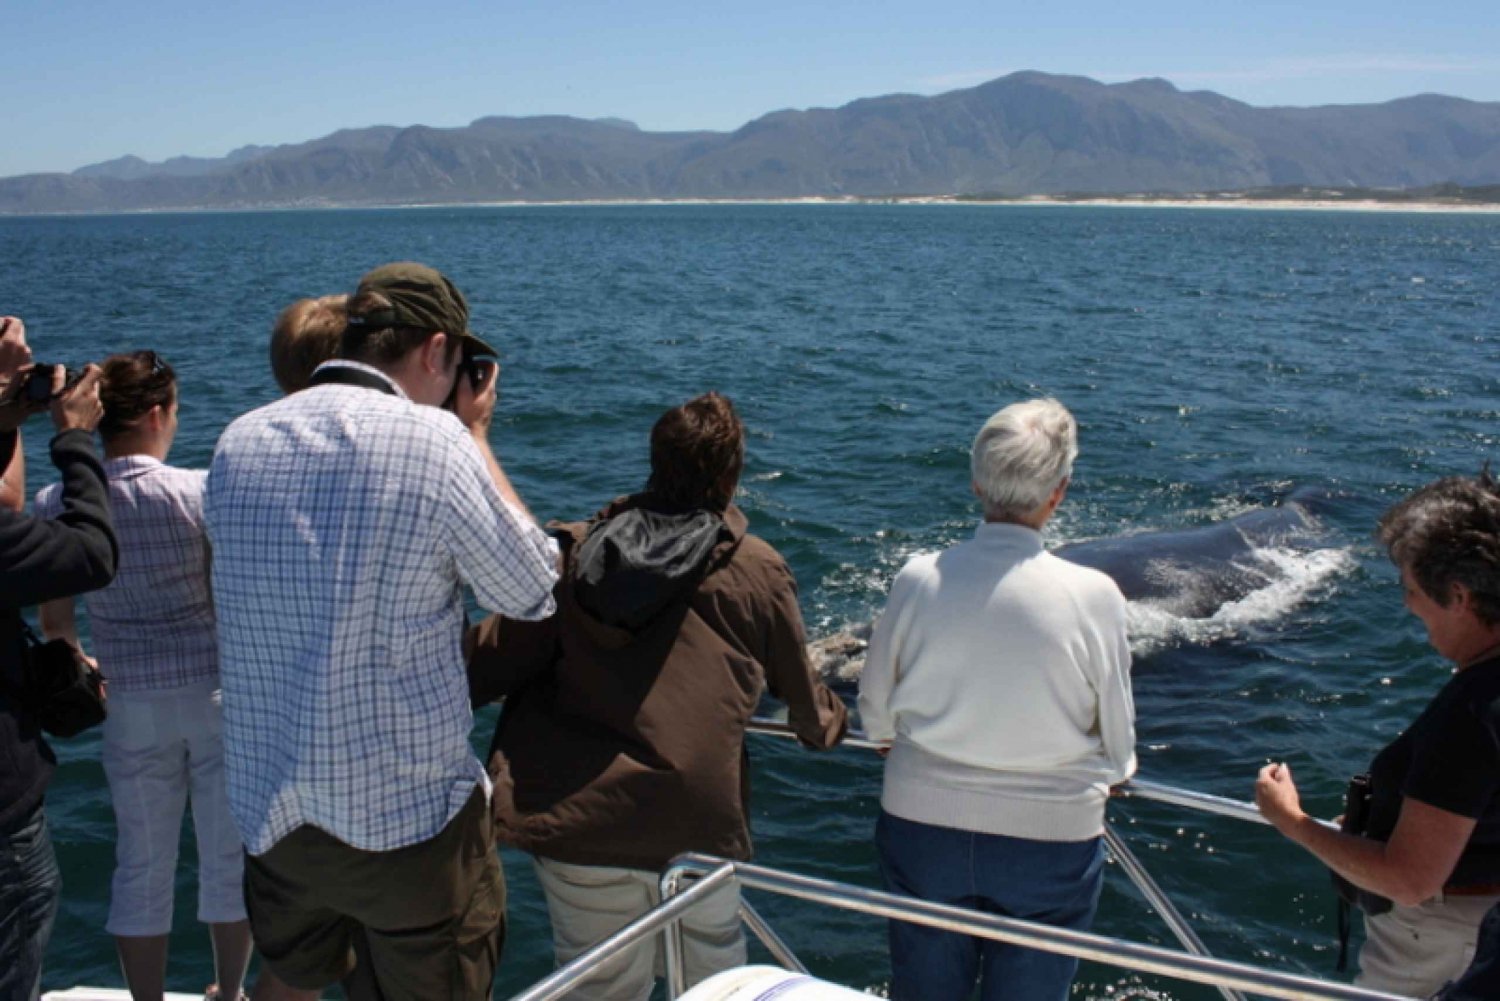 From Cape Town: Whale Watching Tour in Hermanus and Gansbaai